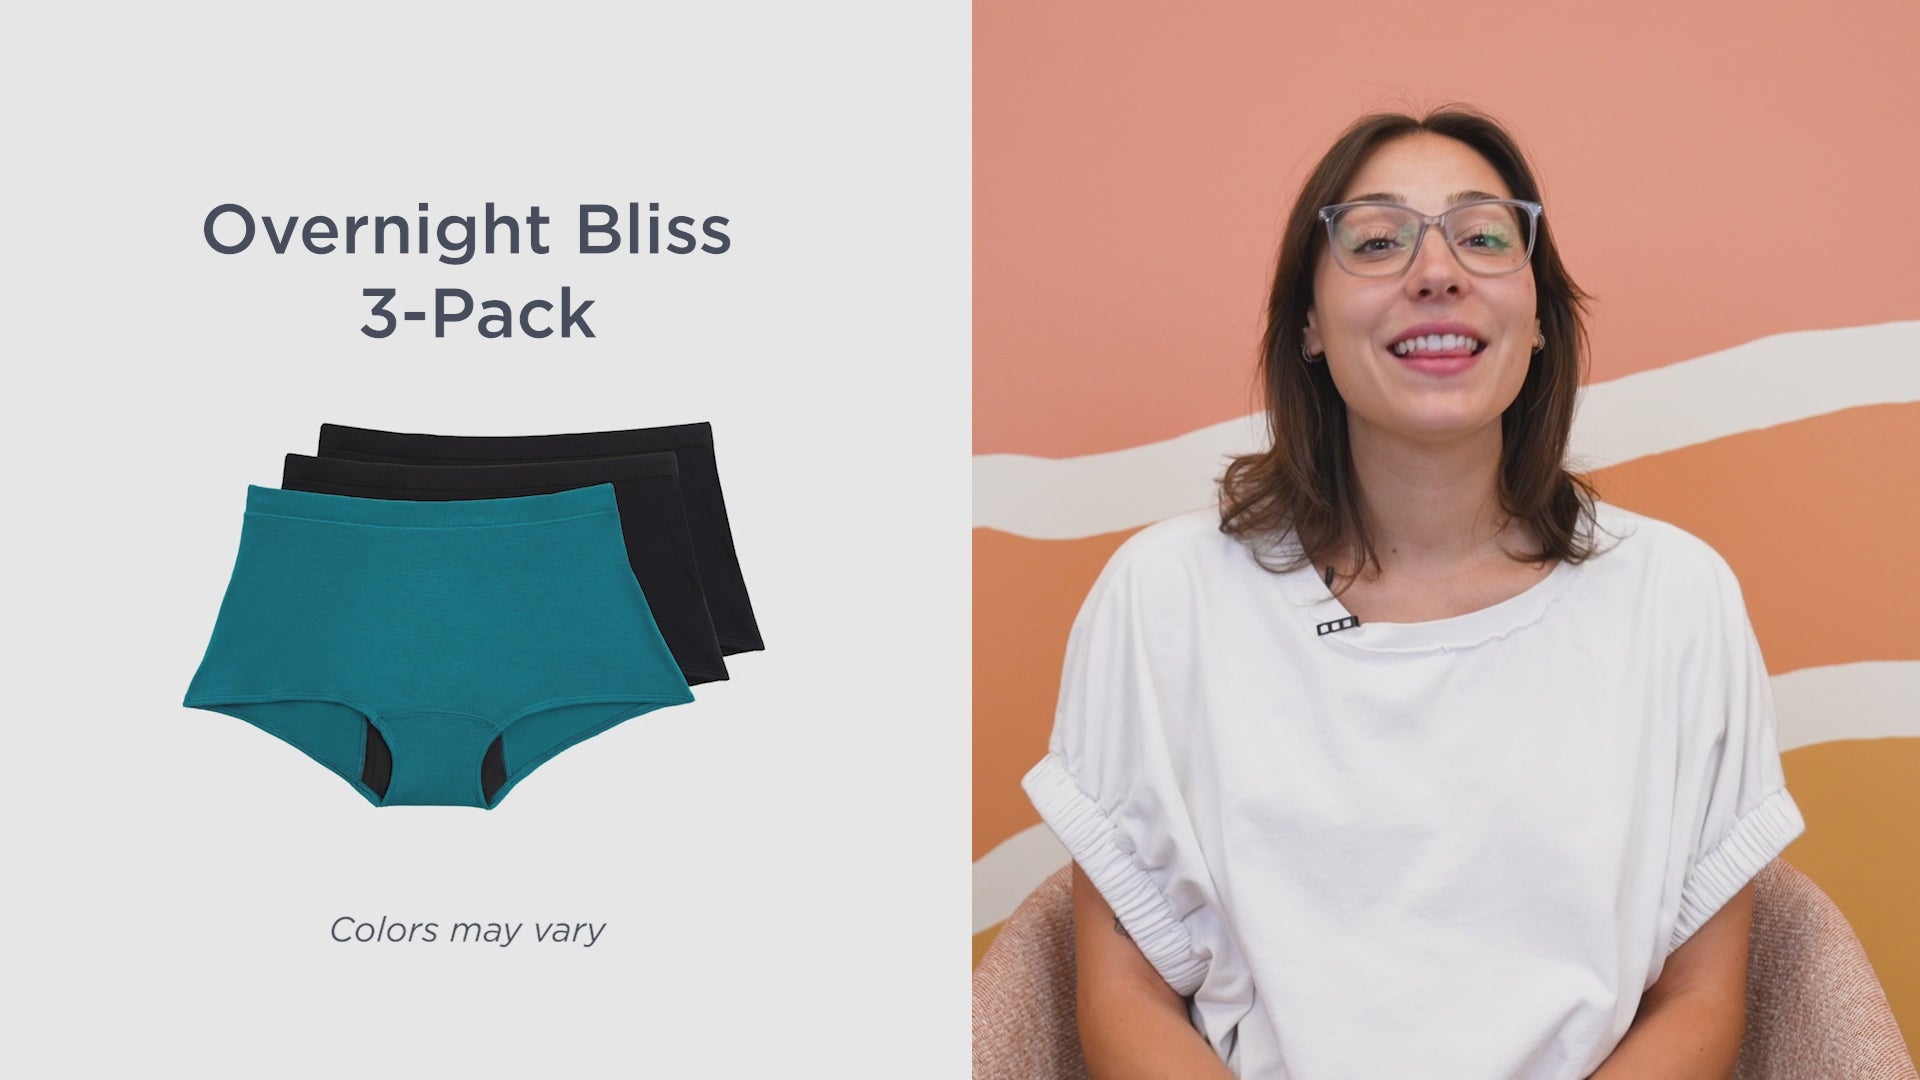 The Overnight Bliss Bundle contains our all-time favorite Comfort Boyshorts. Great for overnight, postpartum wear, or your heaviest period days.